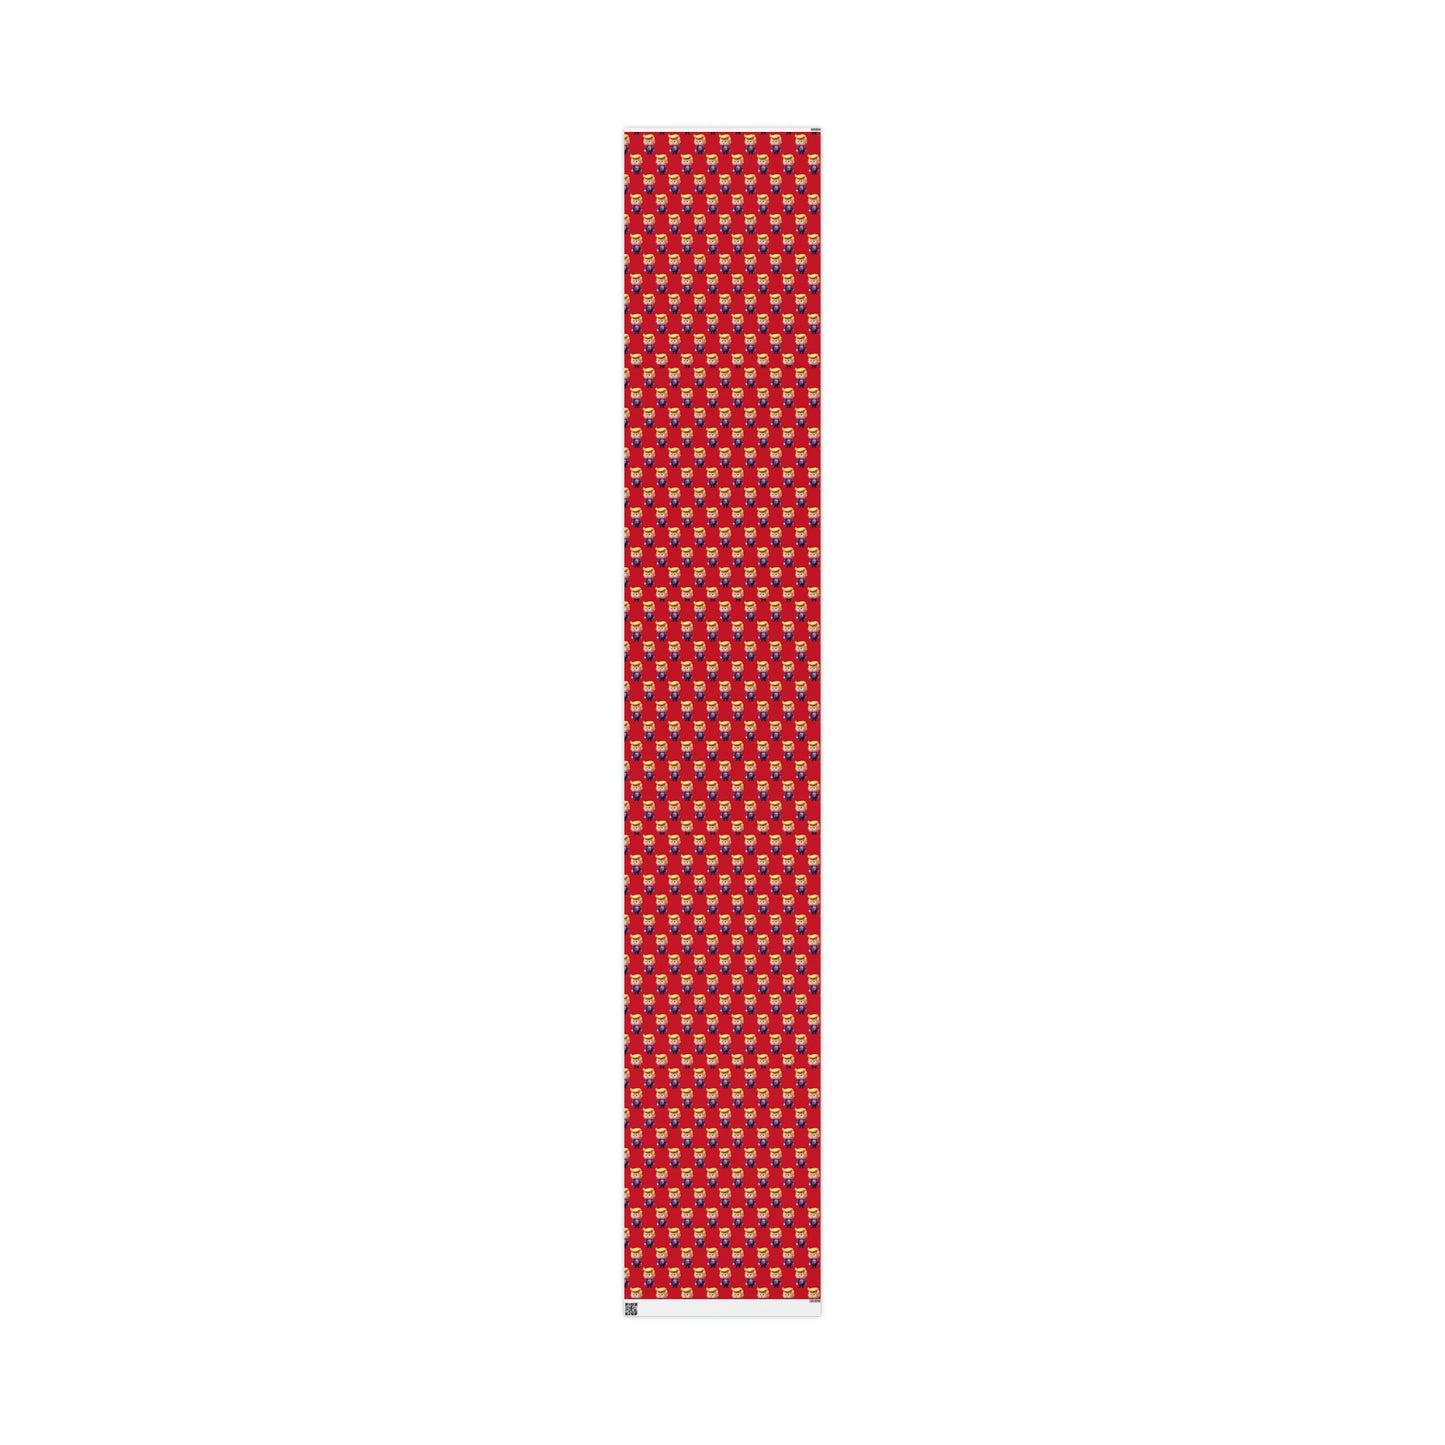 Red Little Trump MAGA Birthday Gift Present Wrapping Paper